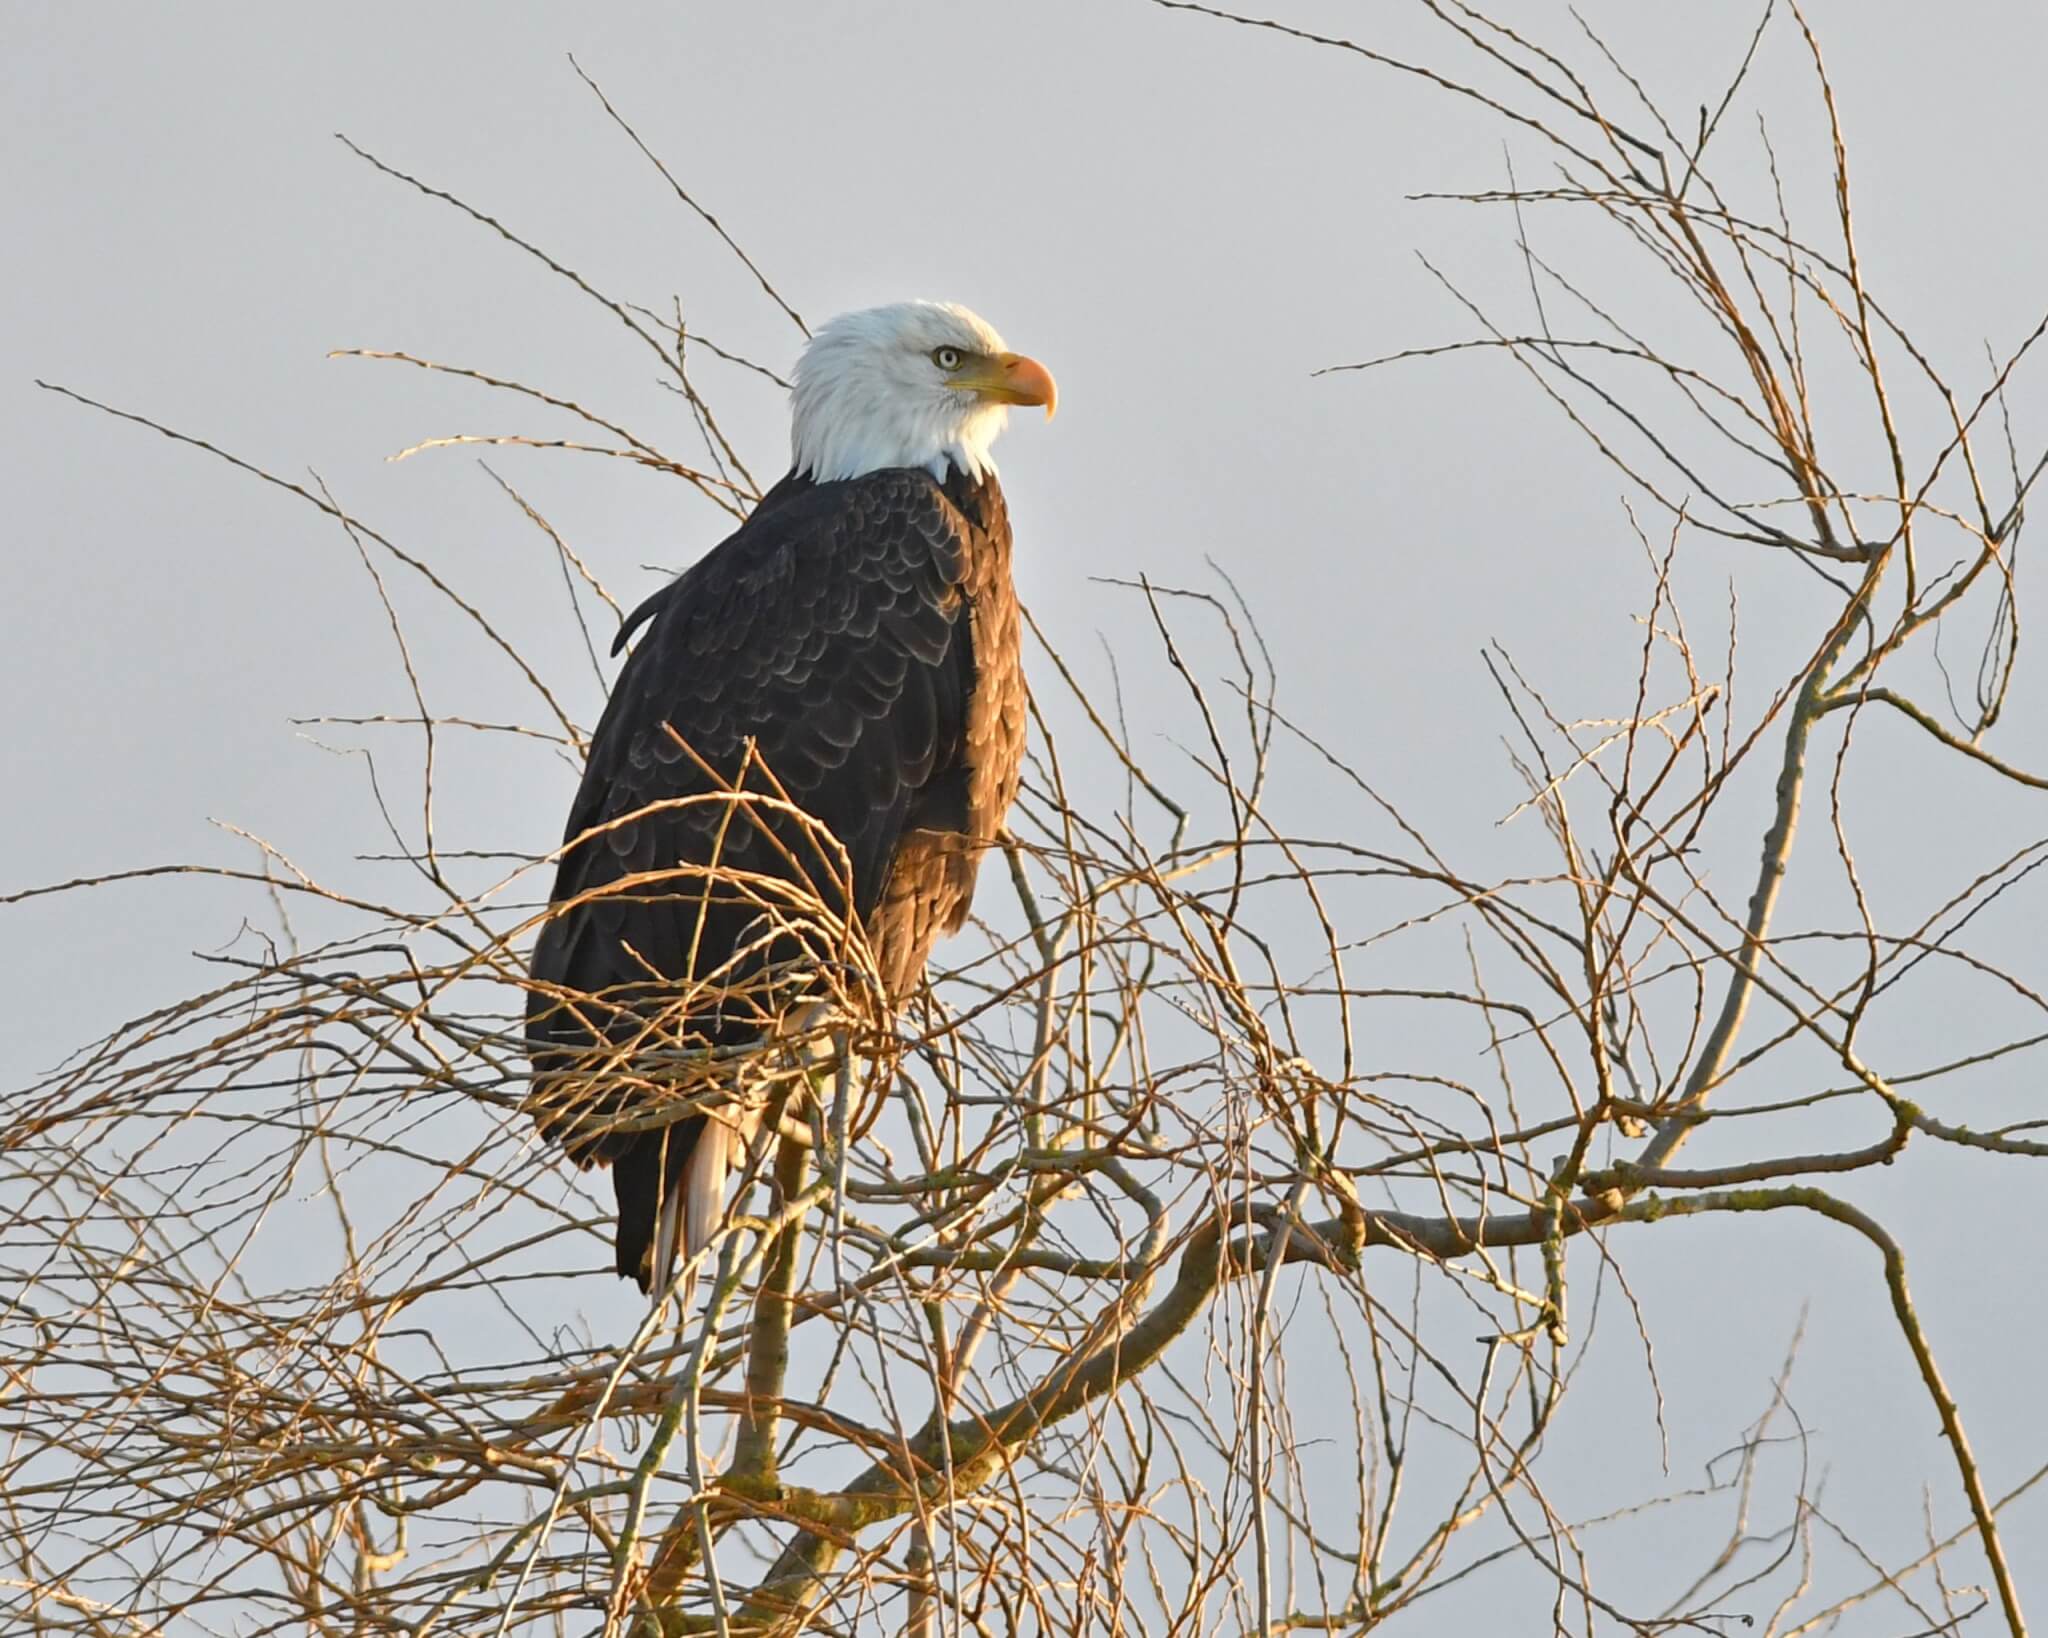 A bald eagle sits in the care branches of a tree during during winter.